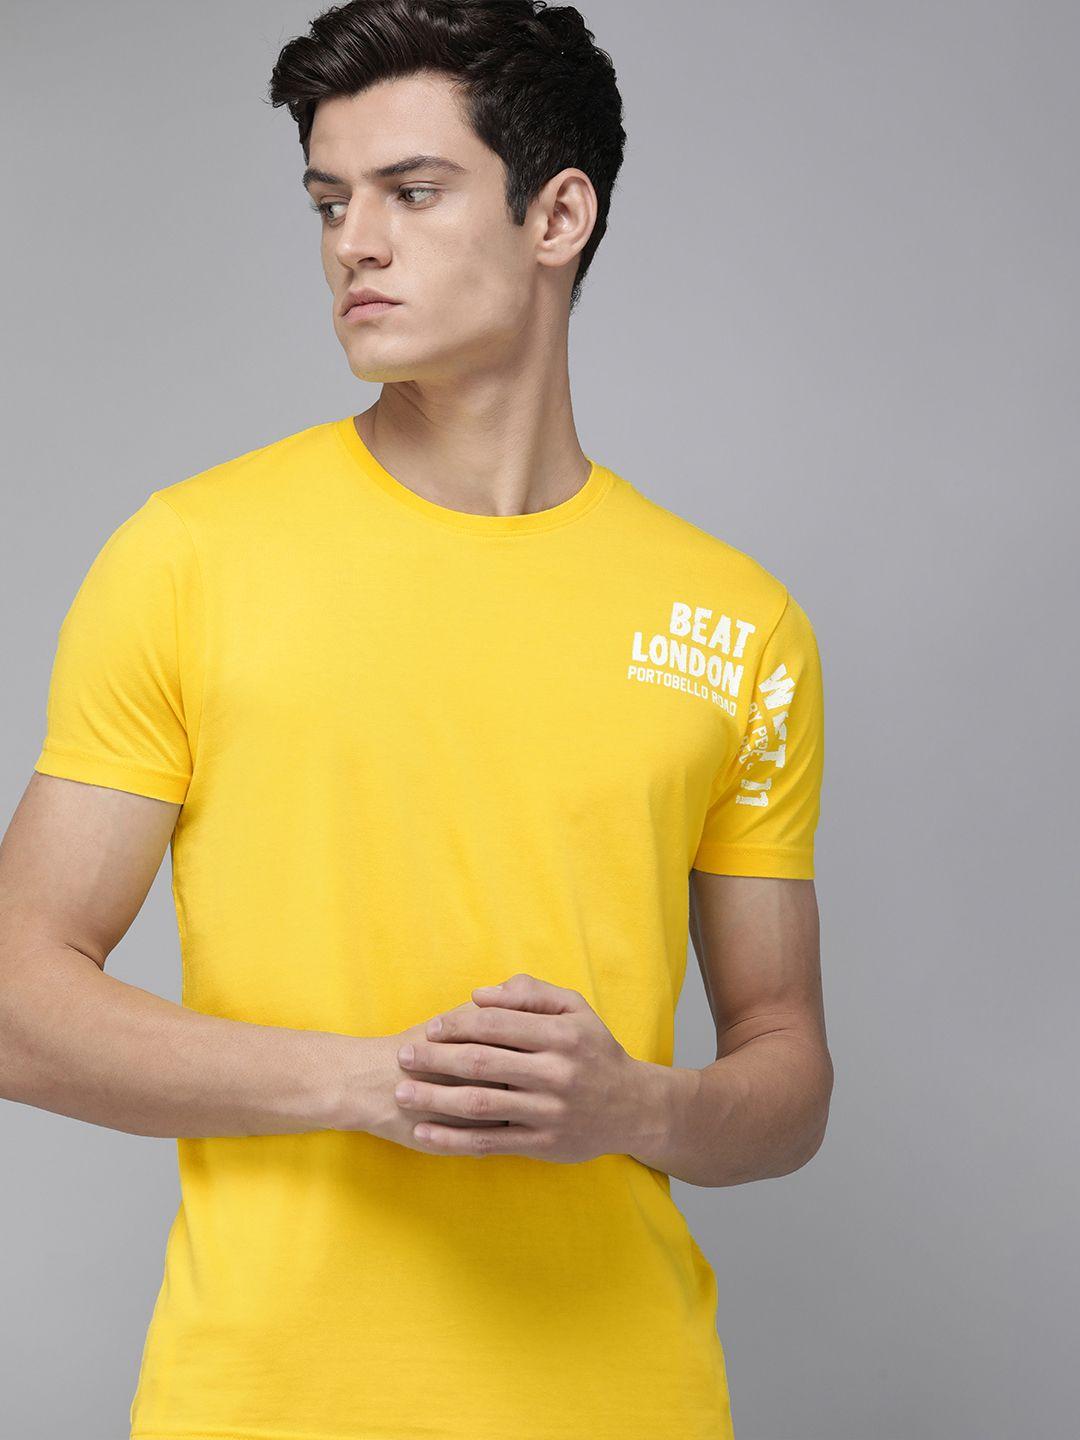 beat london by pepe jeans men yellow & white typography printed pure cotton slim fit t-shirt